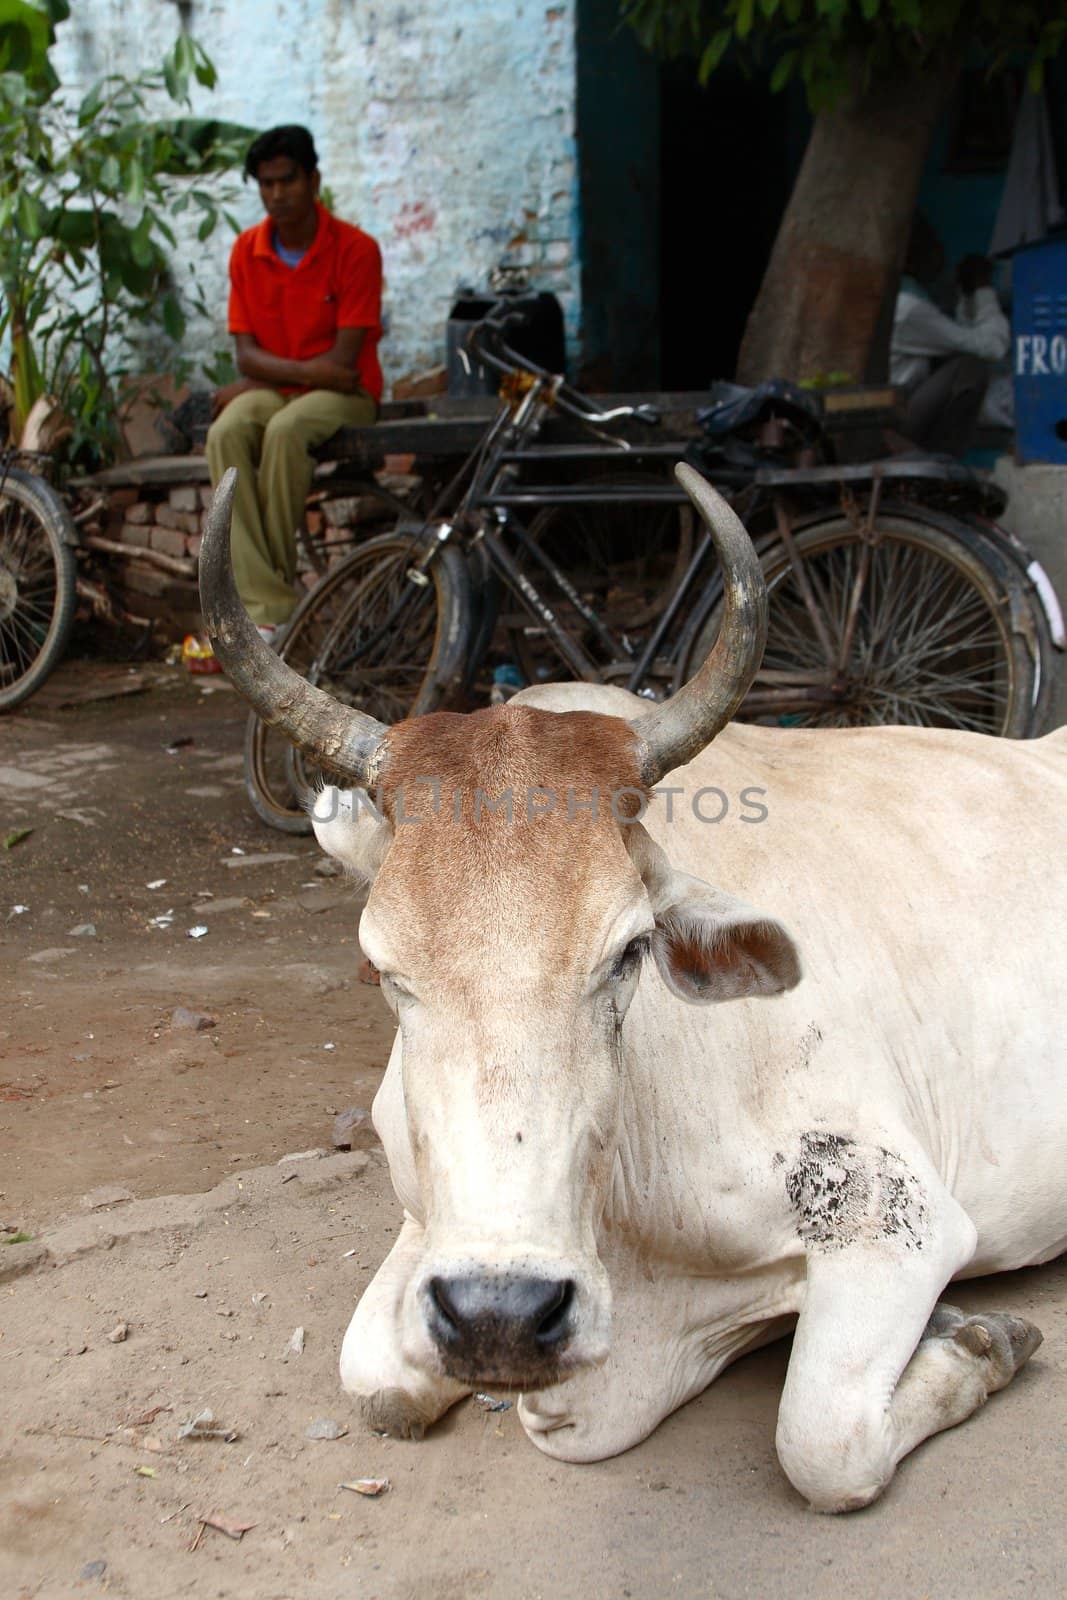 a street scene in India - holy cow on the street